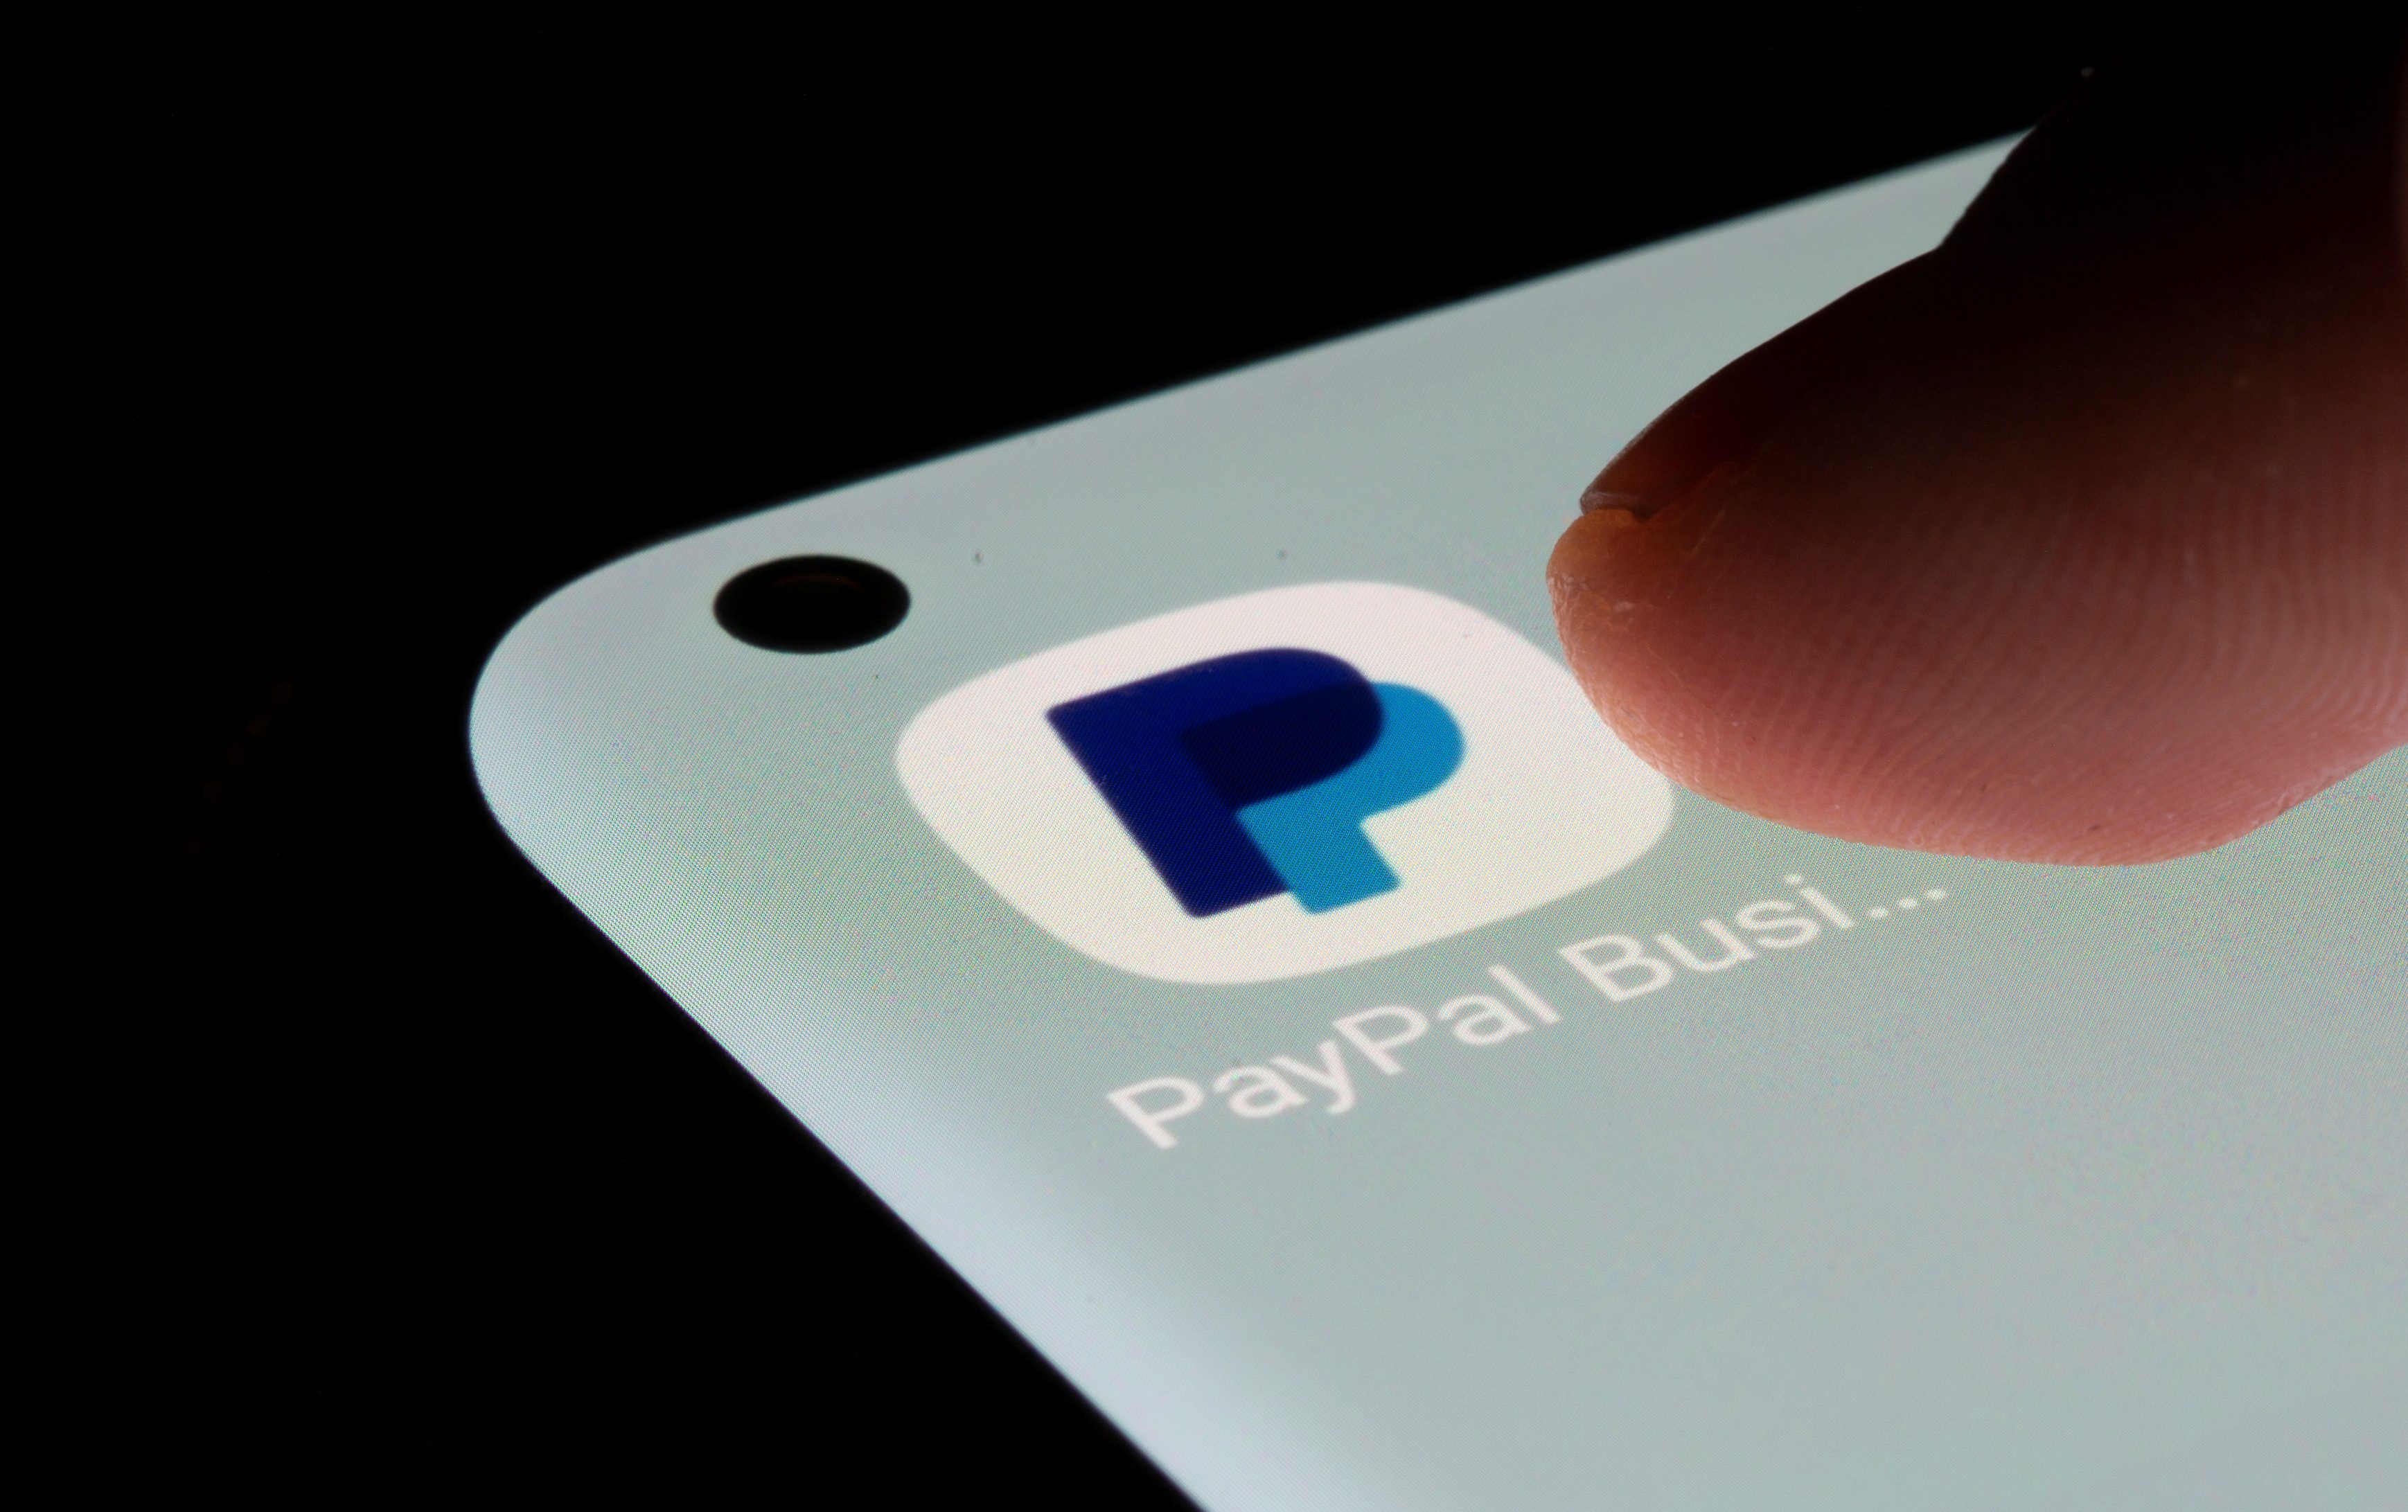 PayPal to research blocking transactions that fund hate groups, extremists